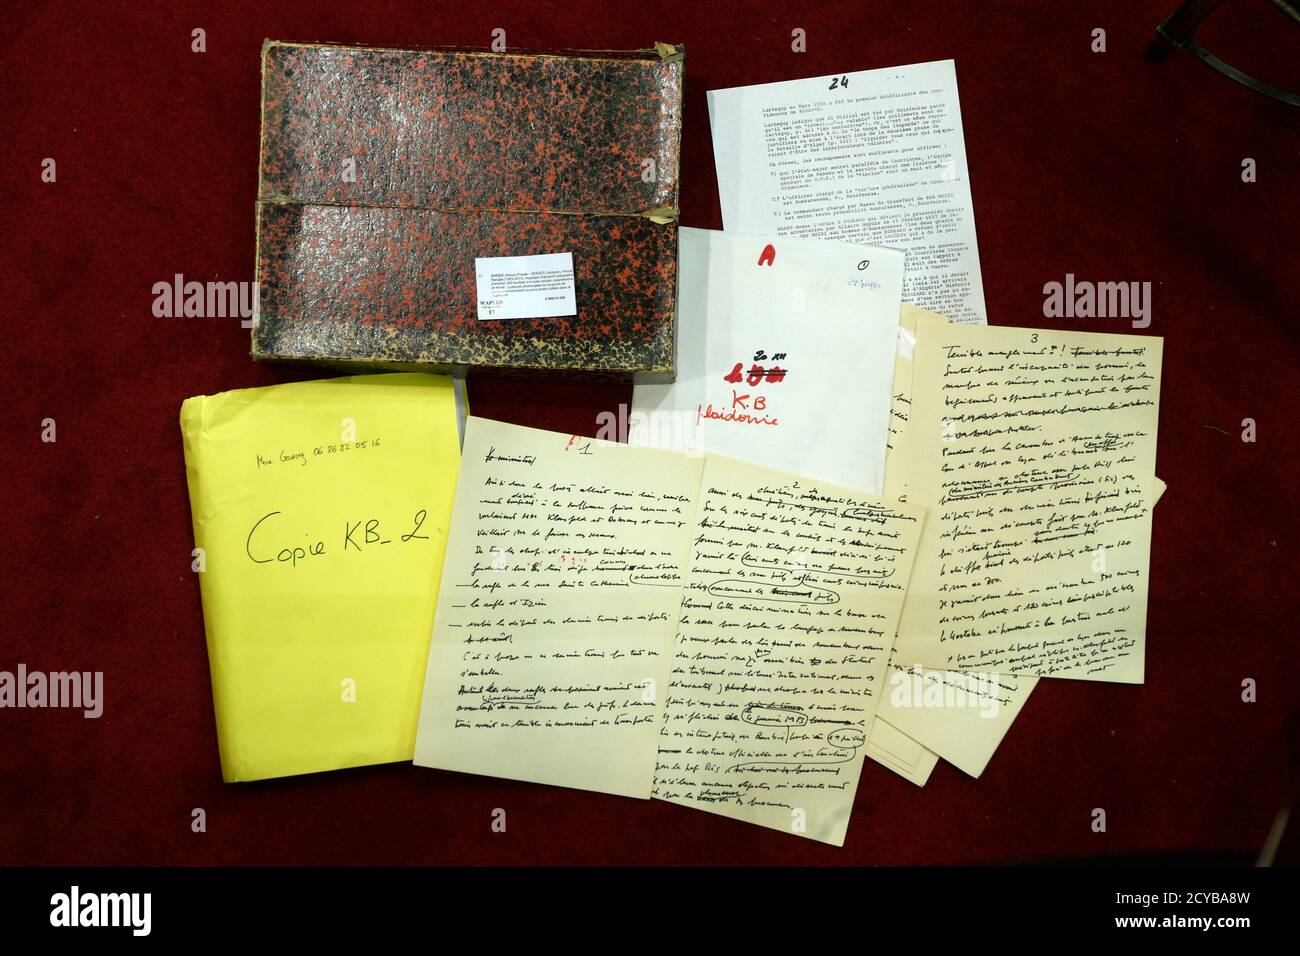 A view shows some the preparatory notes by French lawyer Jacques Verges (1925-2013) for the trial of former Nazi officer Klaus Barbie trial which are displayed at Drouot auction house